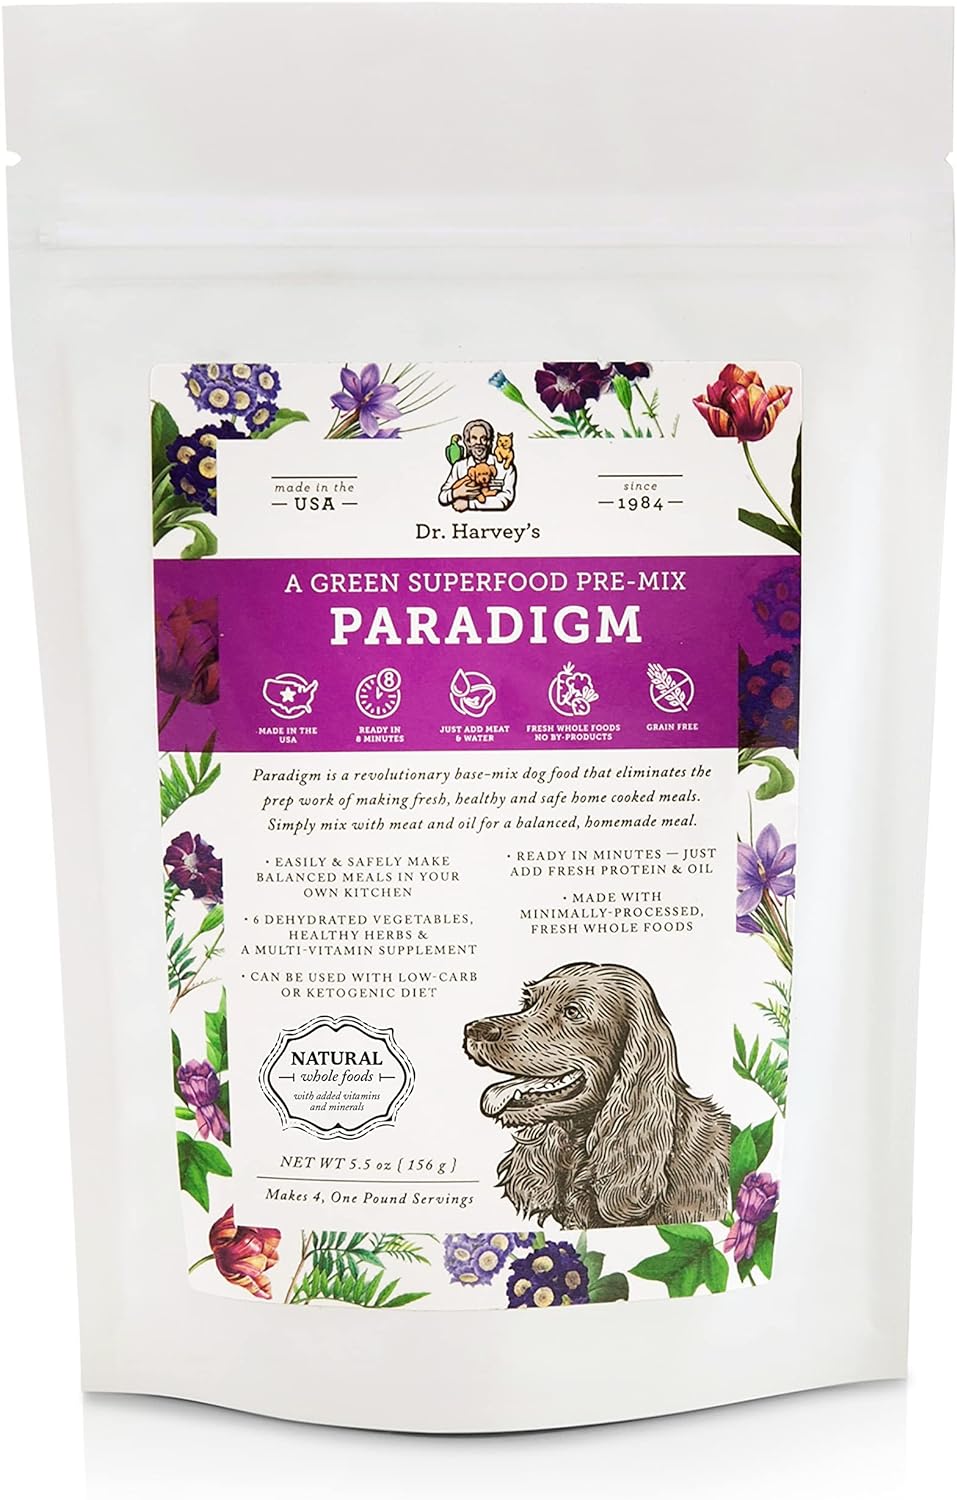 Dr. Harvey's Paradigm Green Superfood Dog Food, Human Grade Dehydrated Grain Free Base Mix for Dogs, Diabetic Low Carb Ketogenic Diet (Trial Size 5.5 oz)